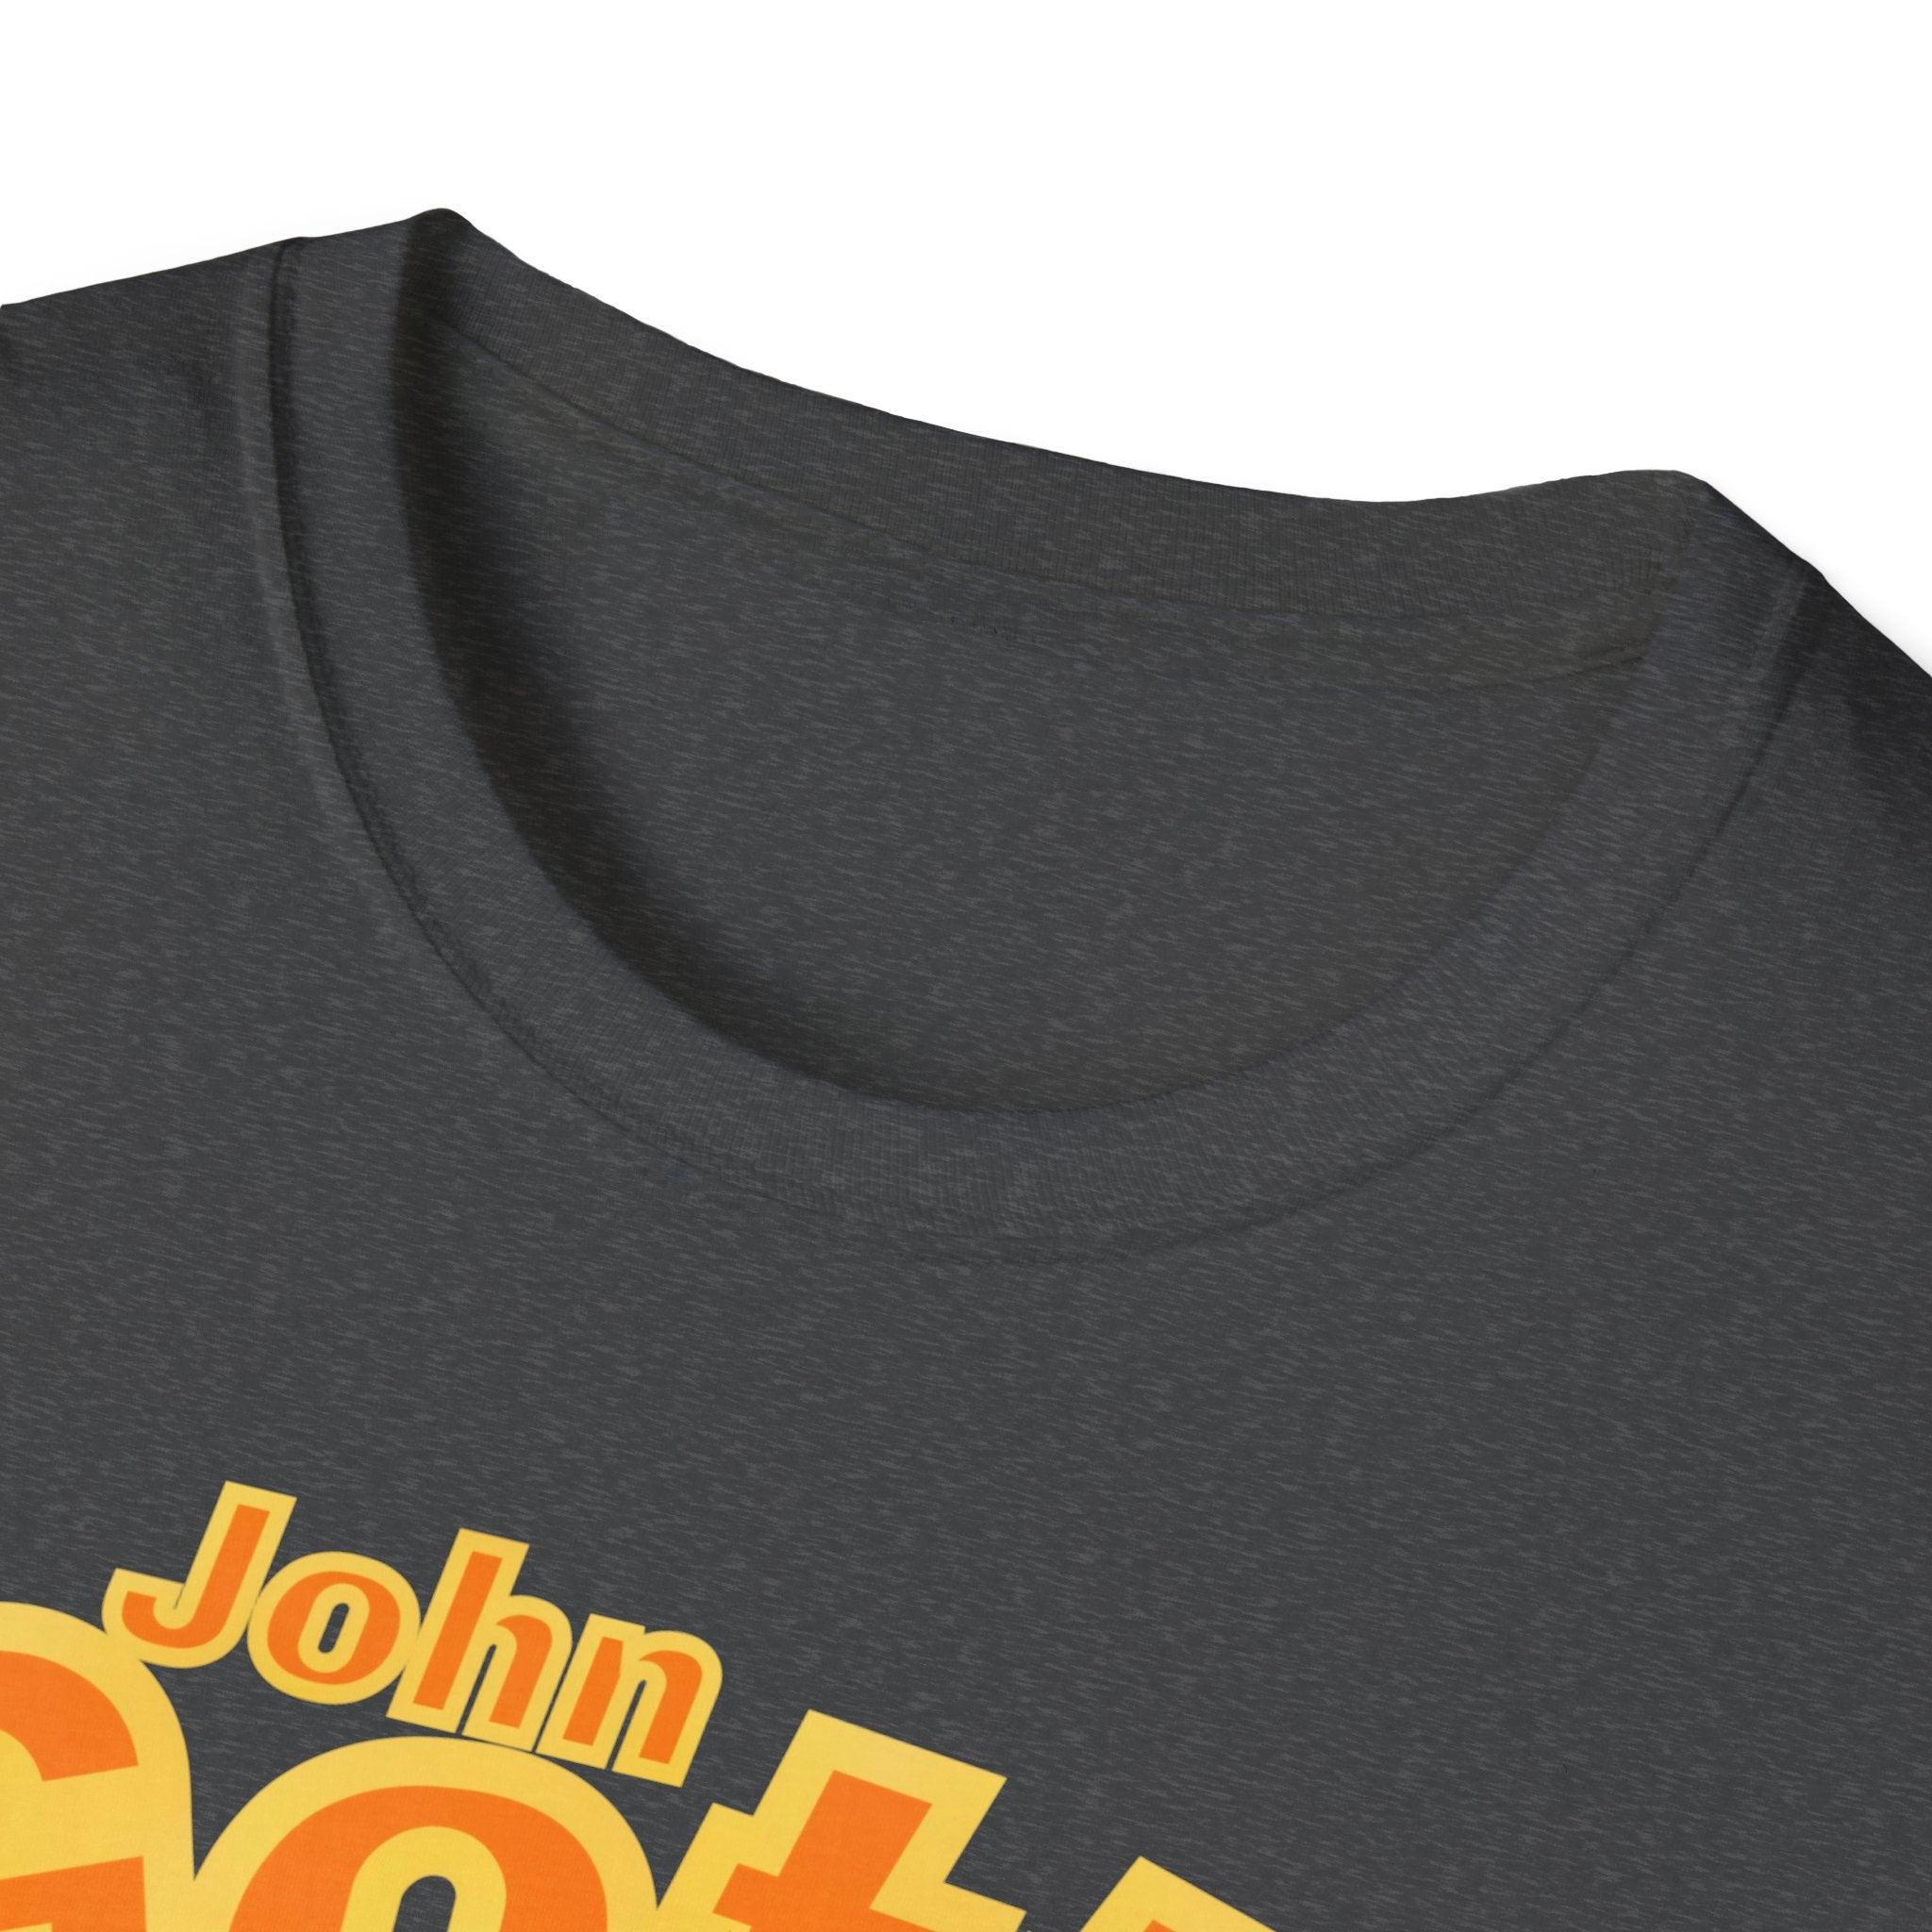 John Gotti - “Follow orders or I’ll blow up your house” T-shirt - Epic Shirts 403